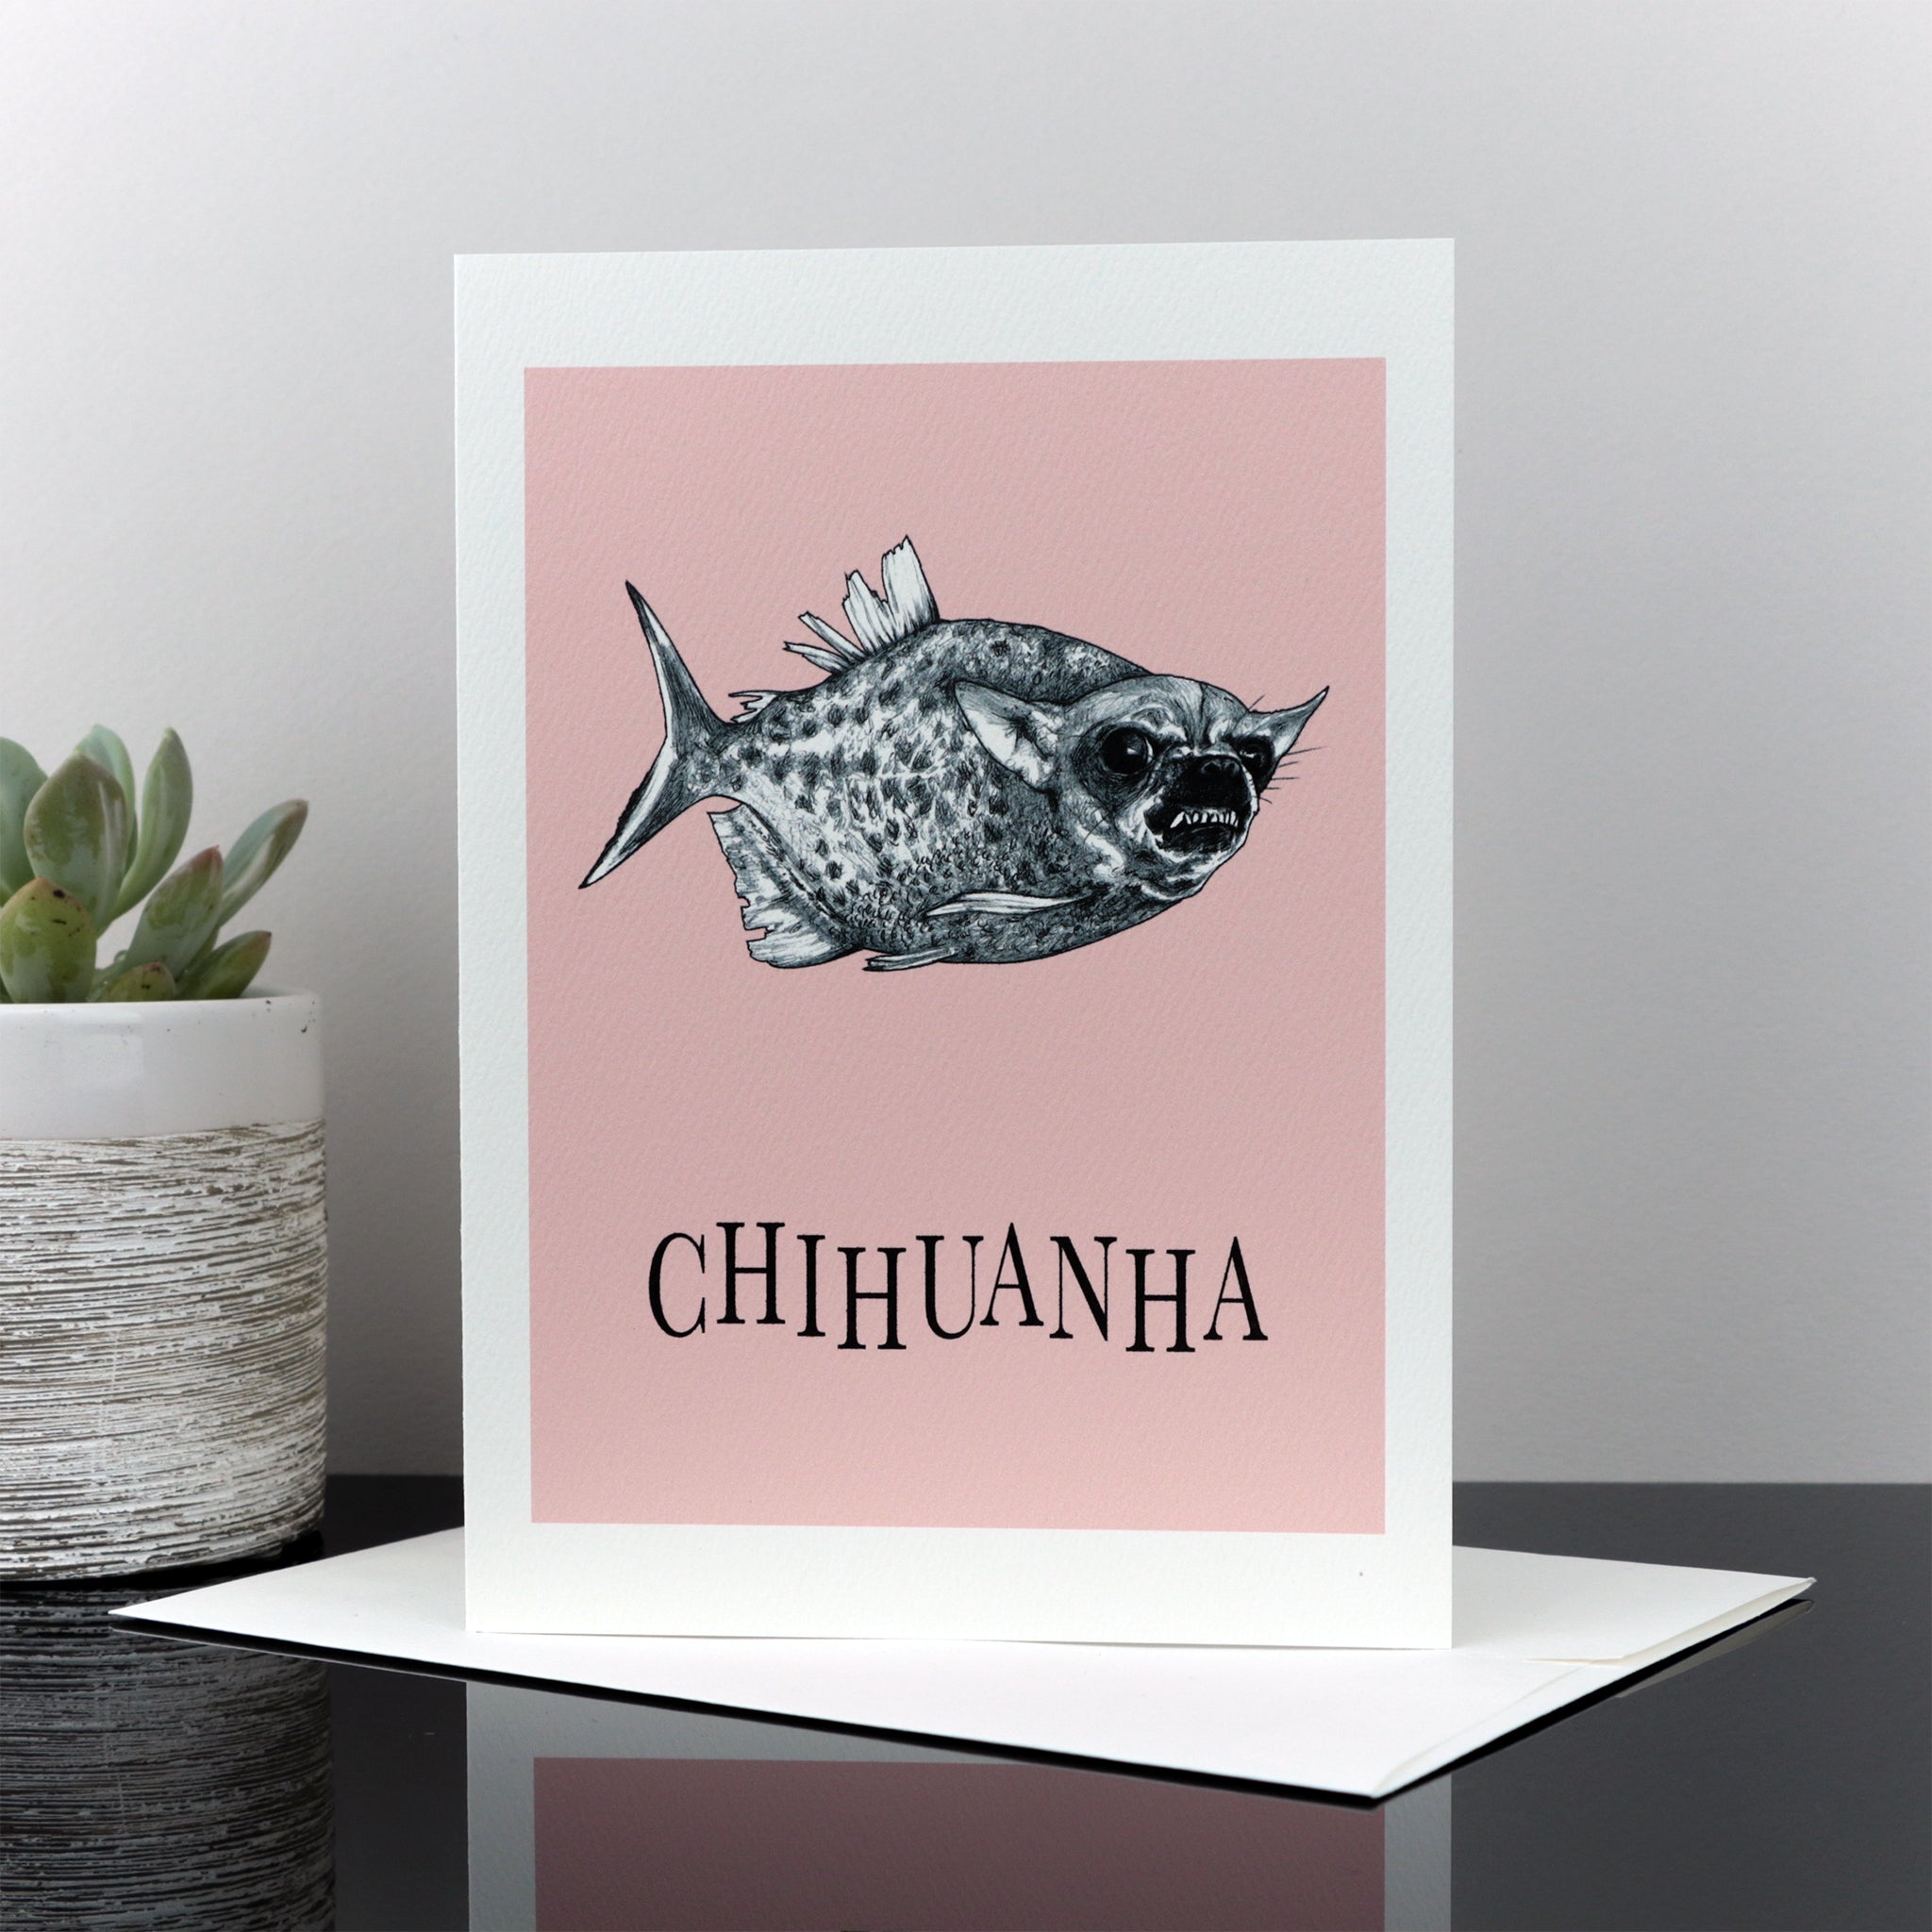 Chihuanha 5x7" Greeting Card